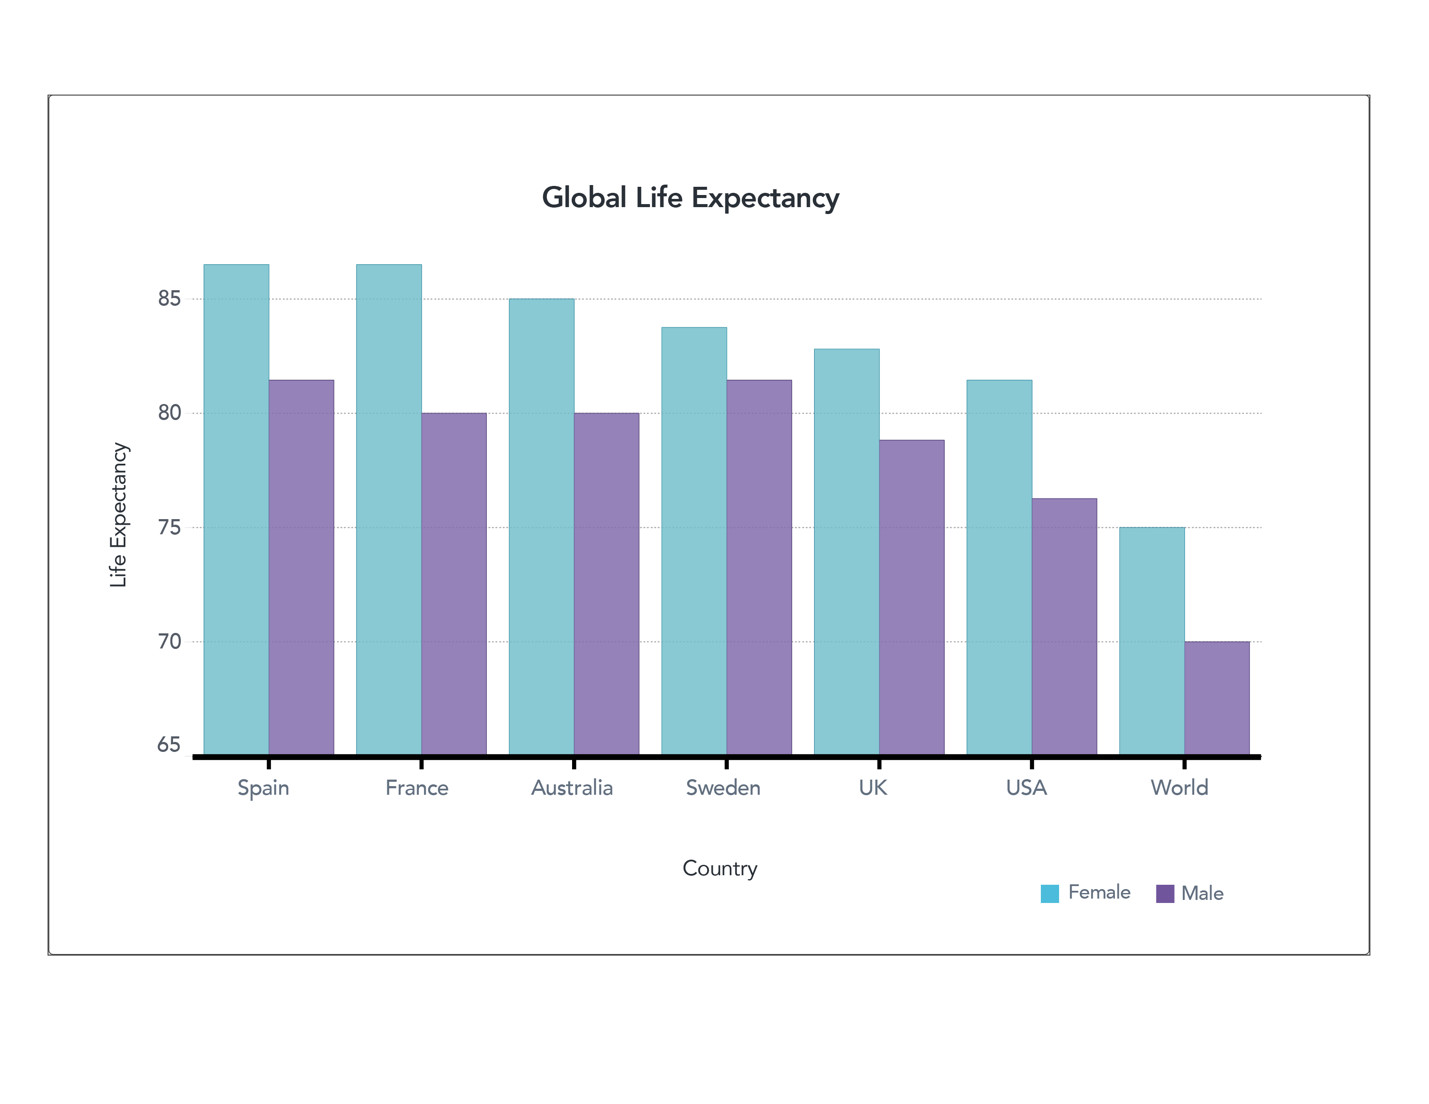 Figure 1. Global Life Expectancy (truncated axis)